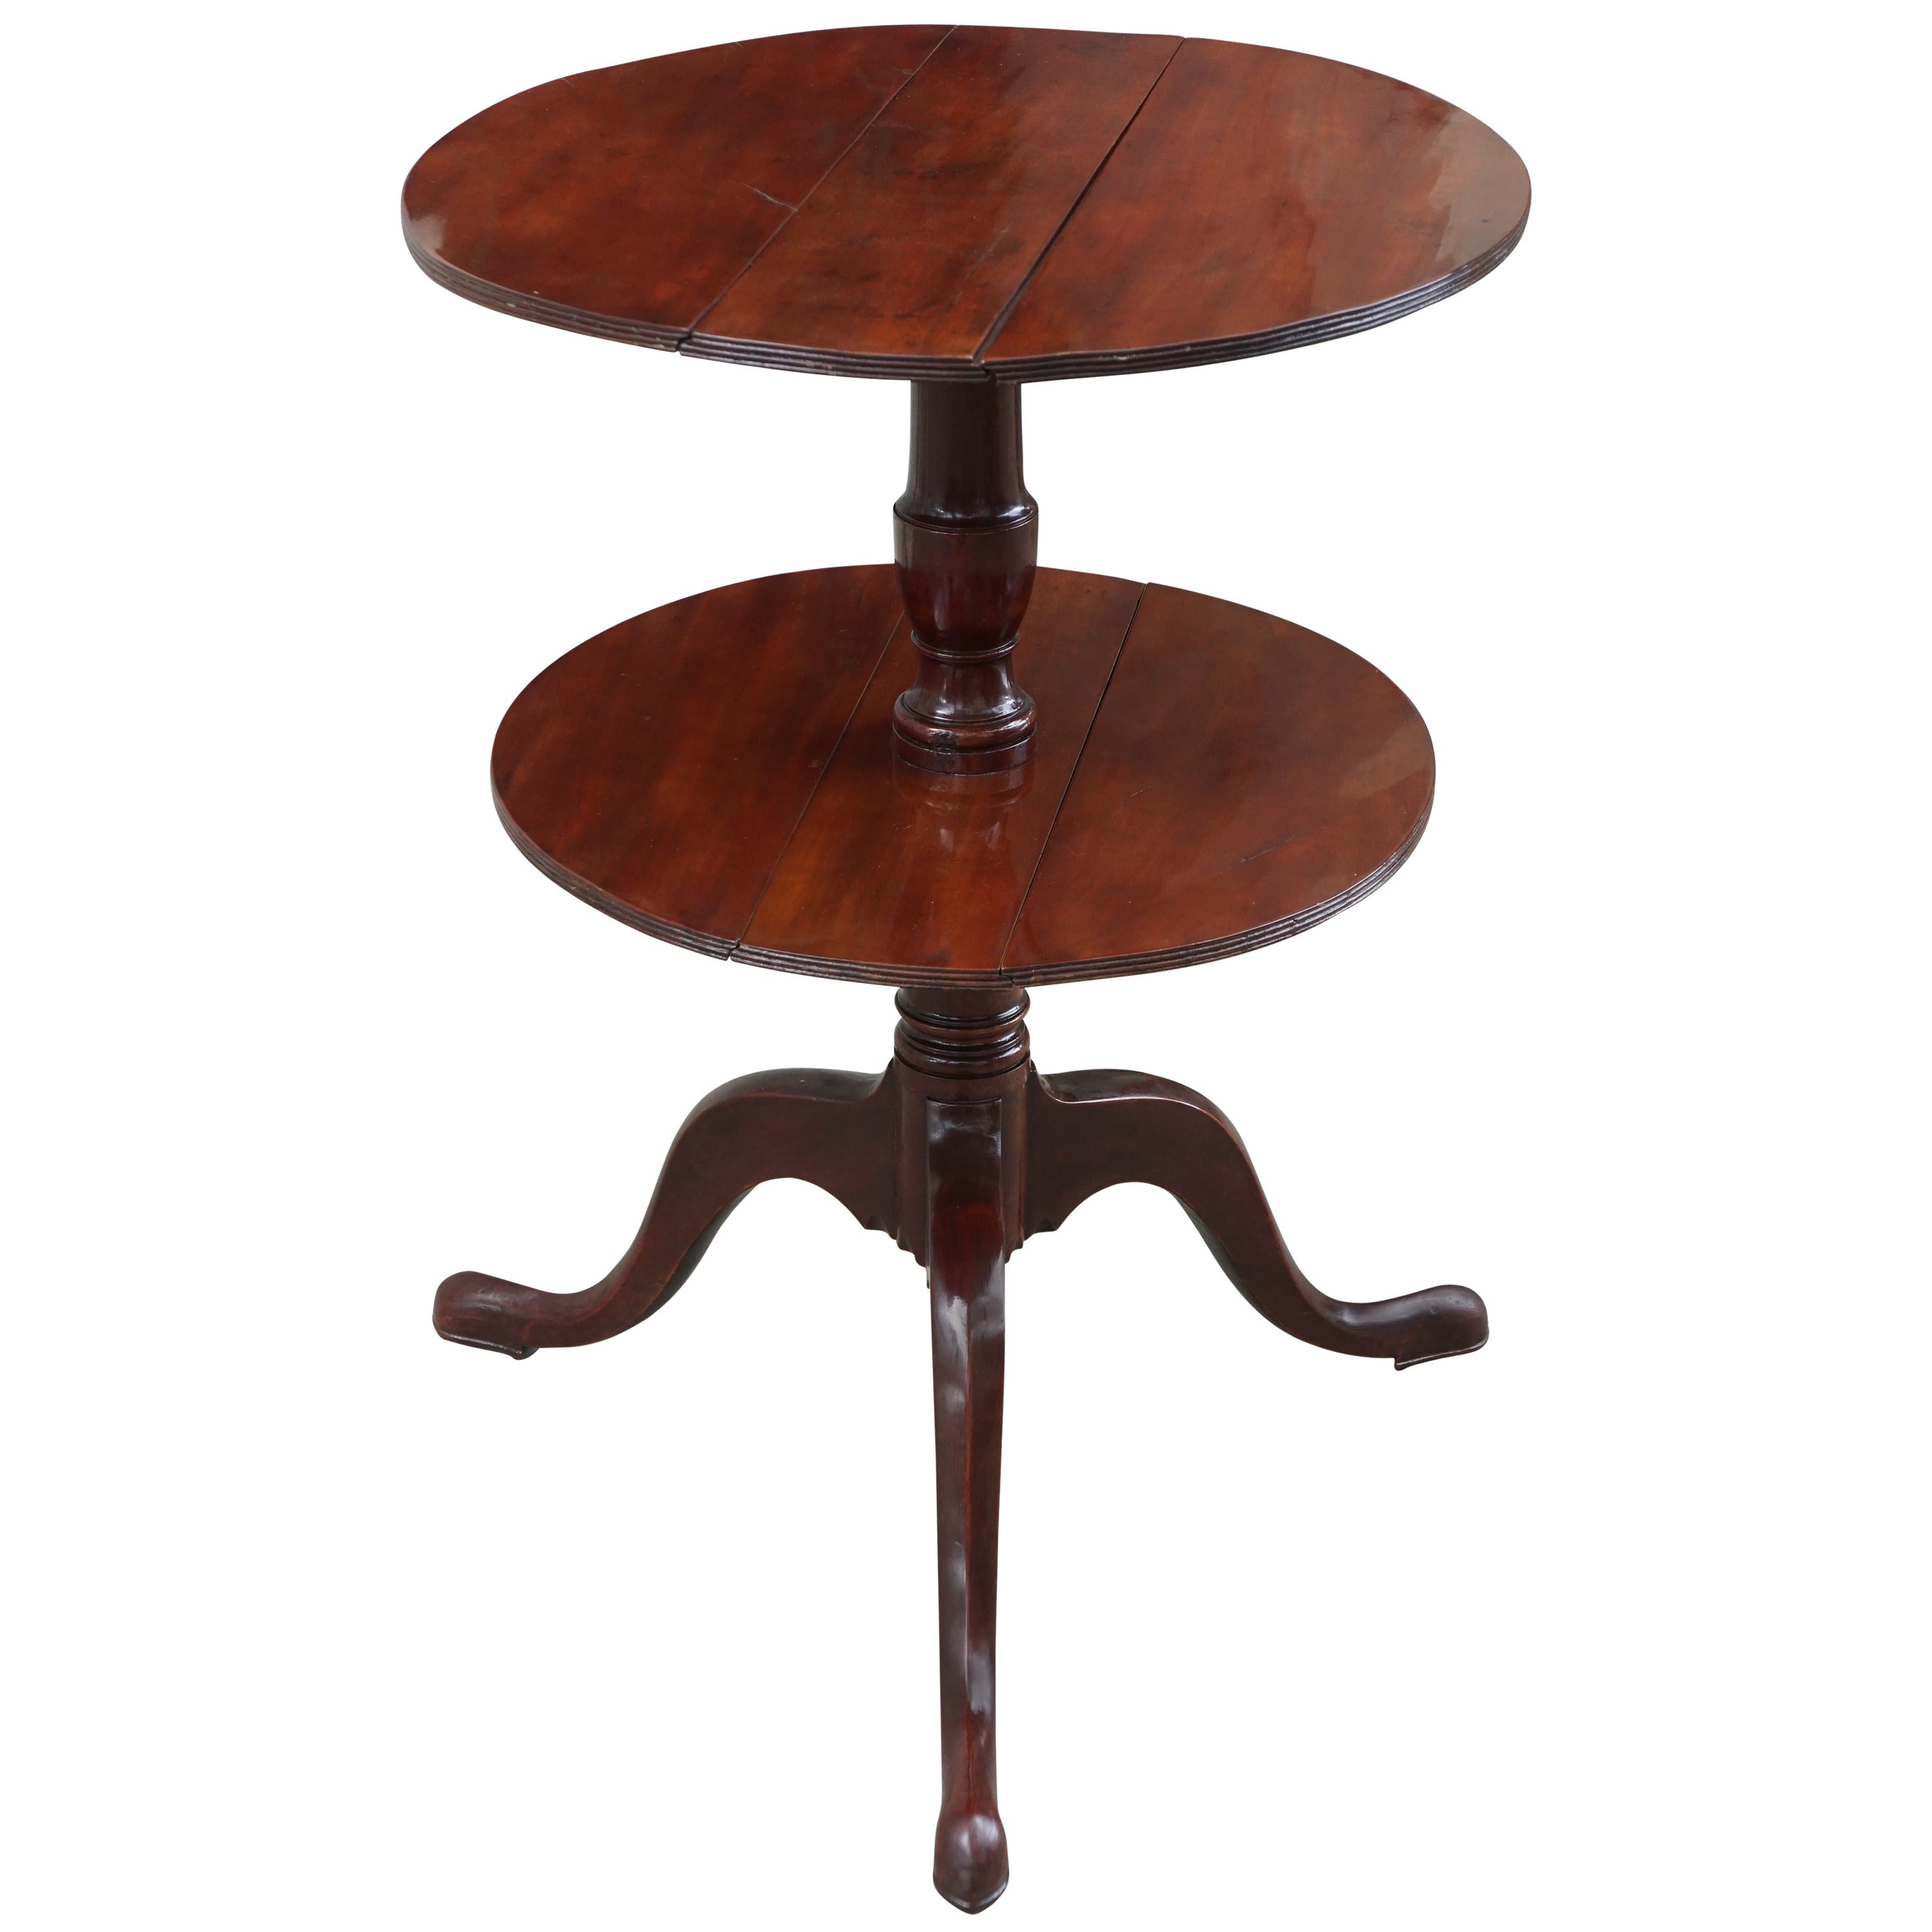 Period George III Mahogany Two-Tiered Dumb Waiter For Sale